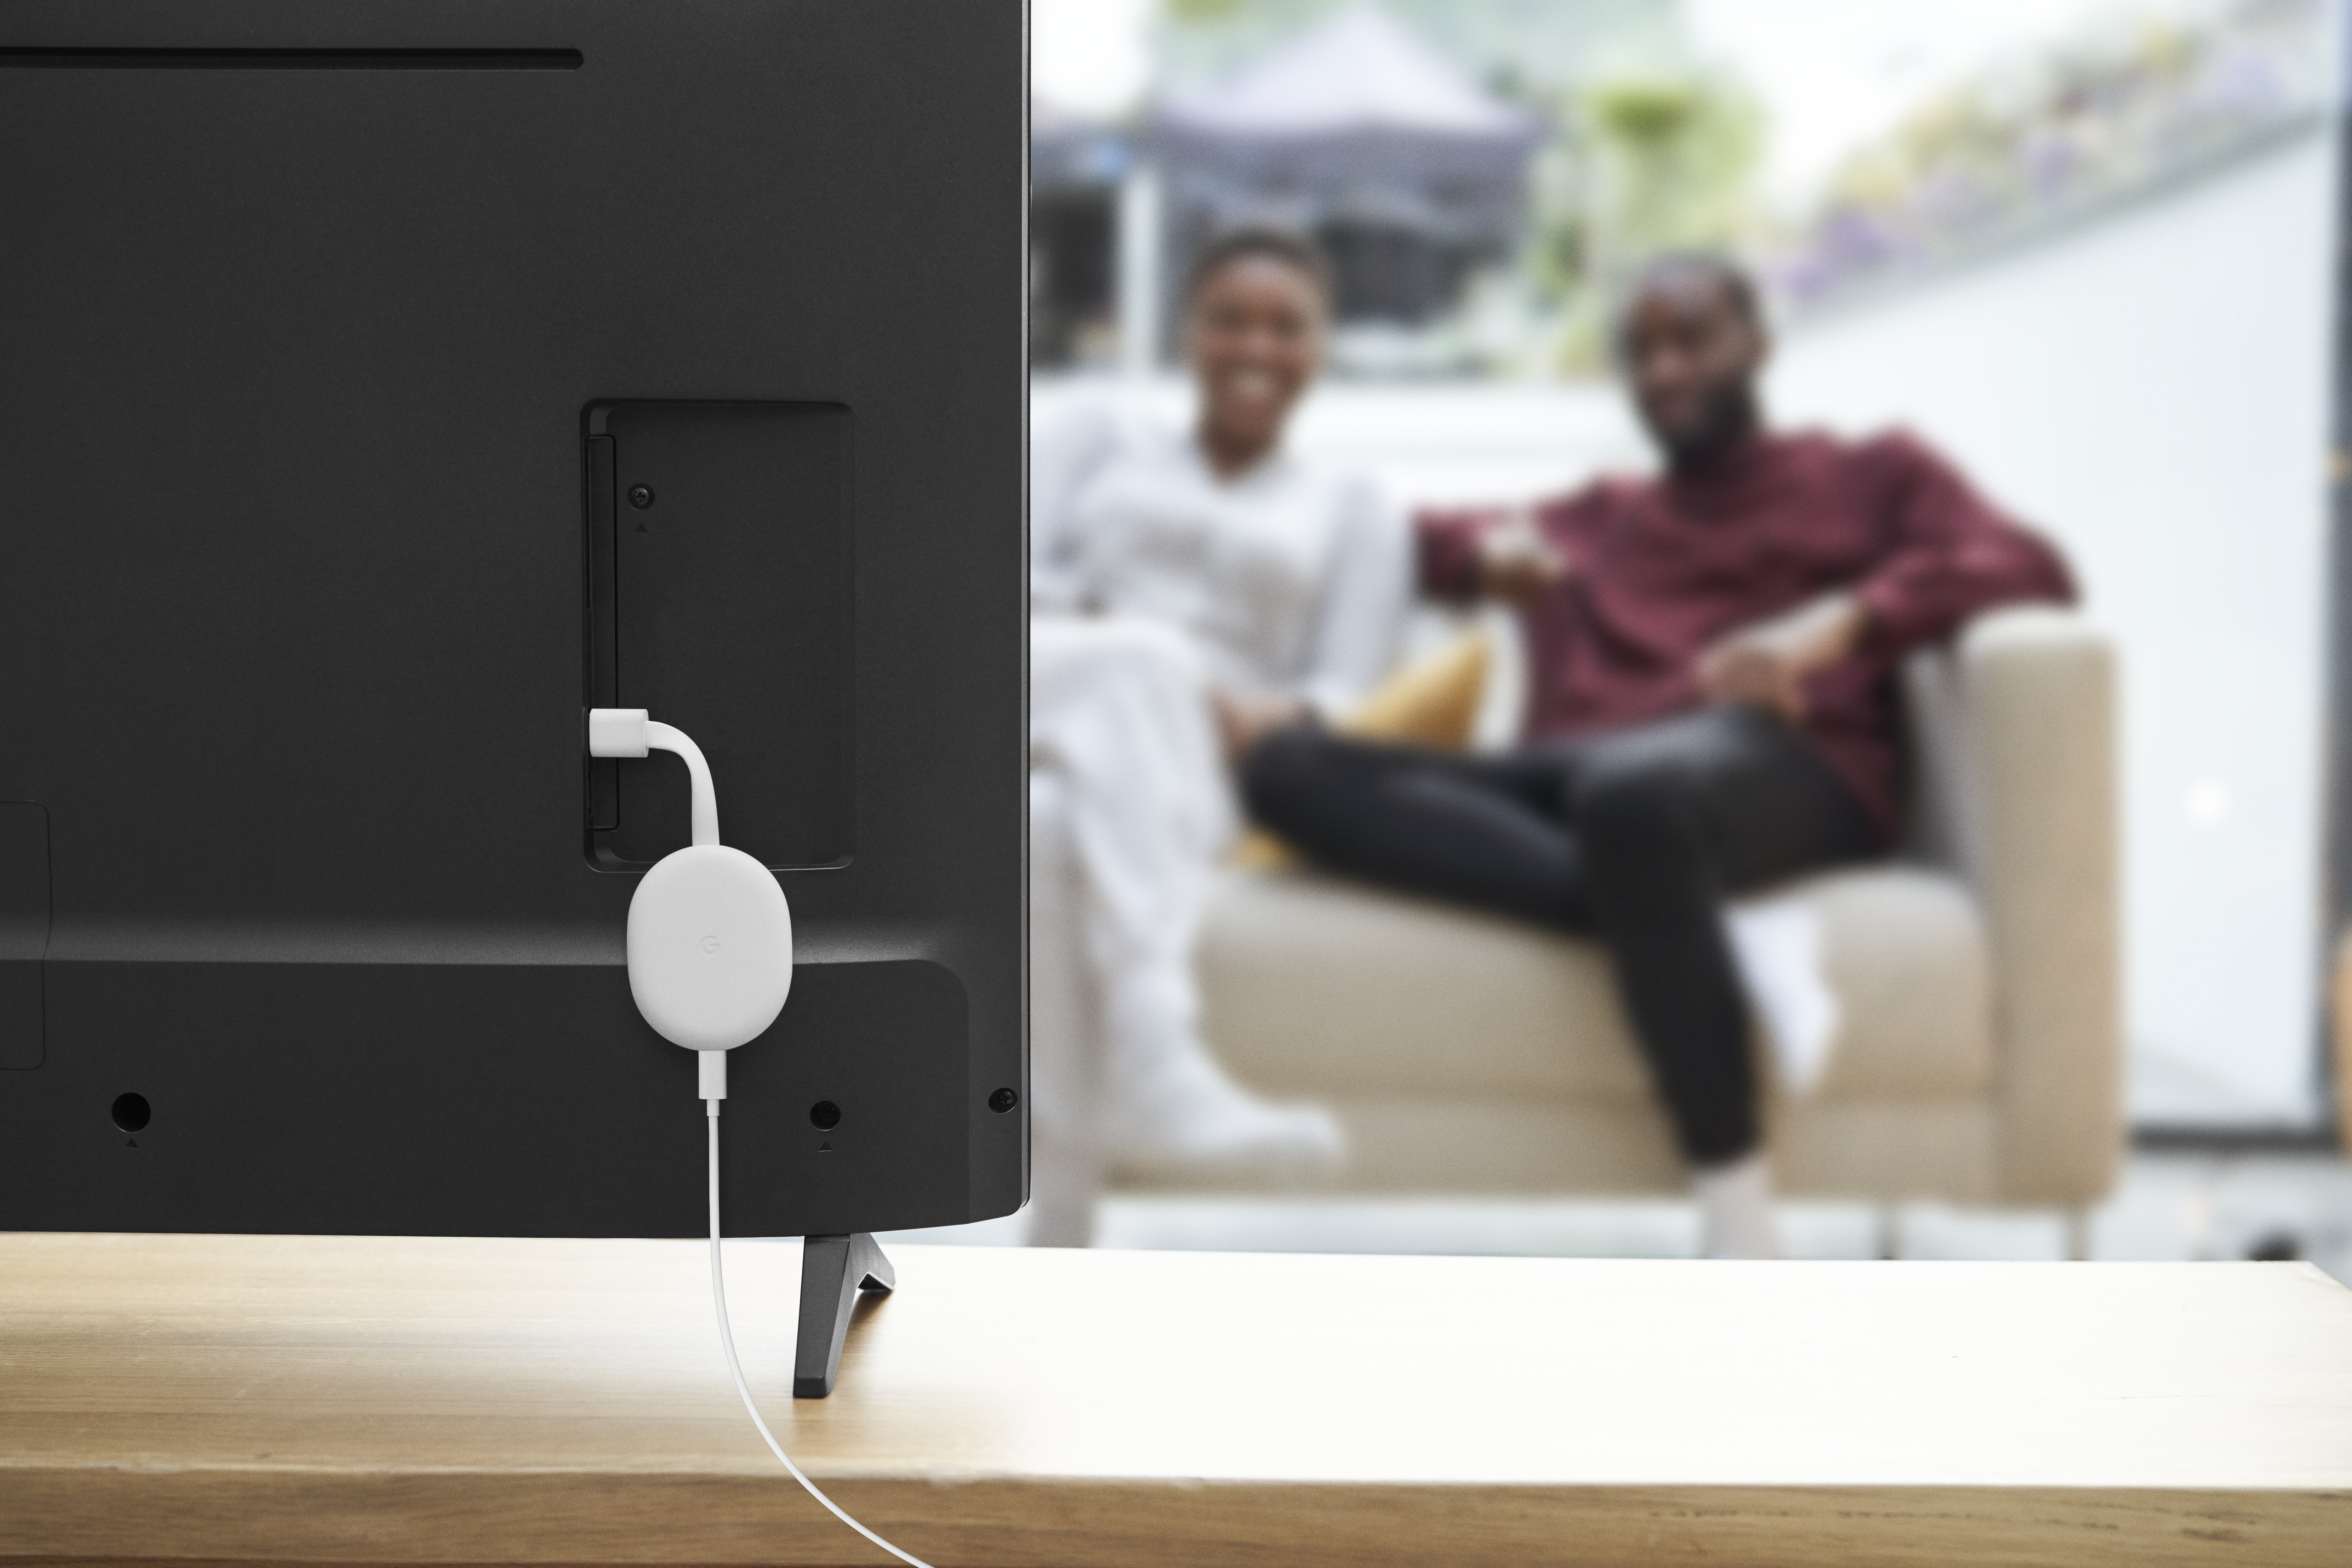 Our best Chromecast yet, now with Google TV